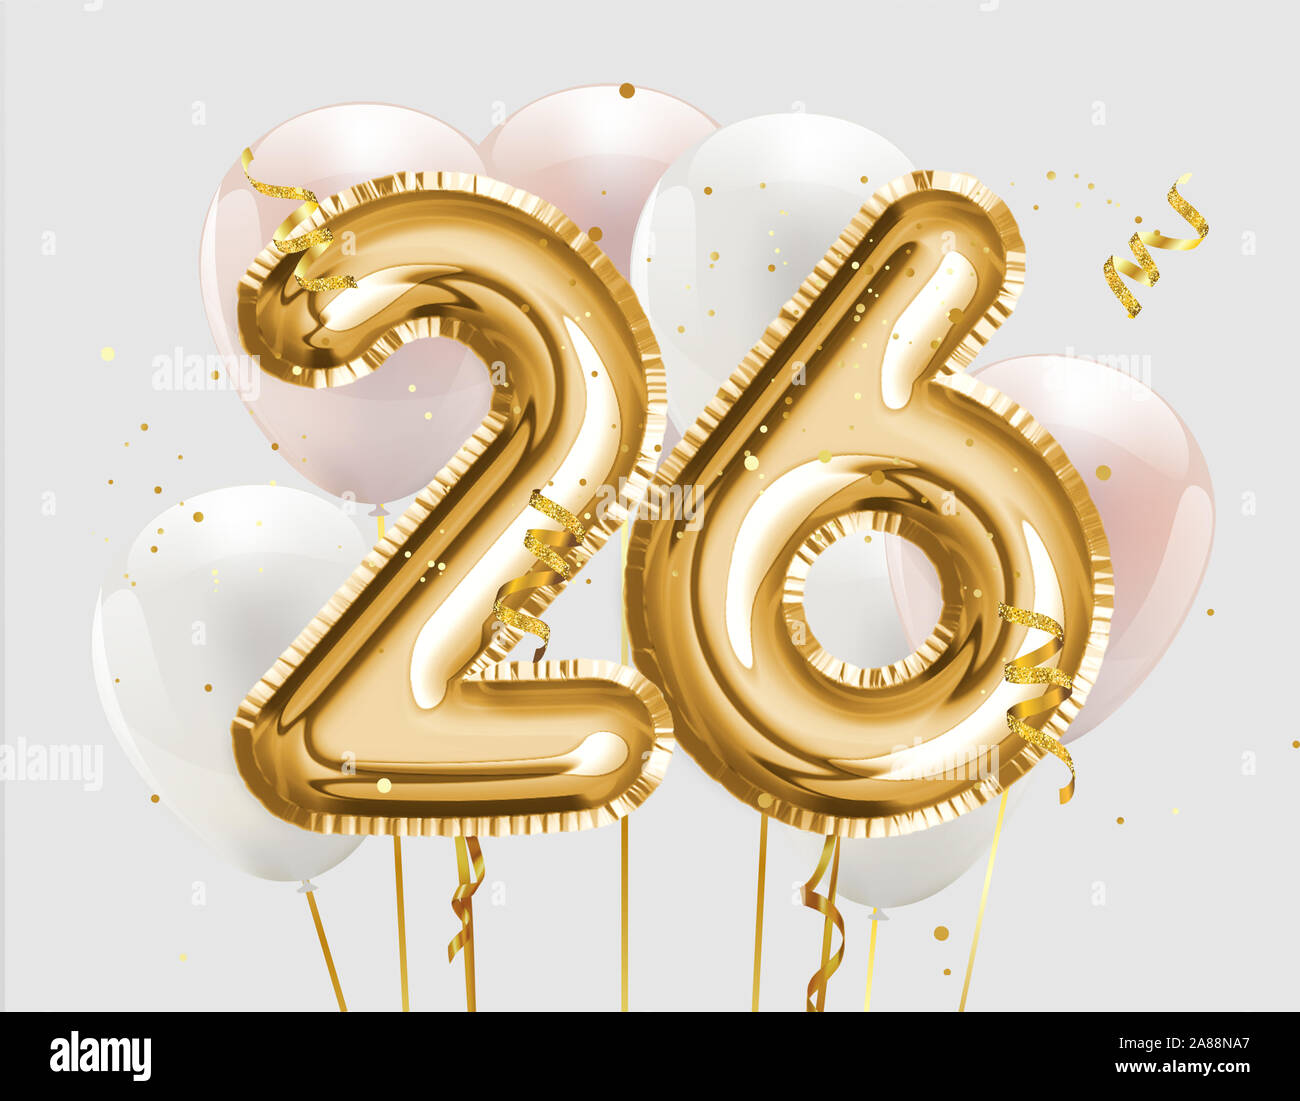 Happy 26th birthday gold foil balloon greeting background. 26 years anniversary logo template- 26th celebrating with confetti. Photo stock. Stock Photo